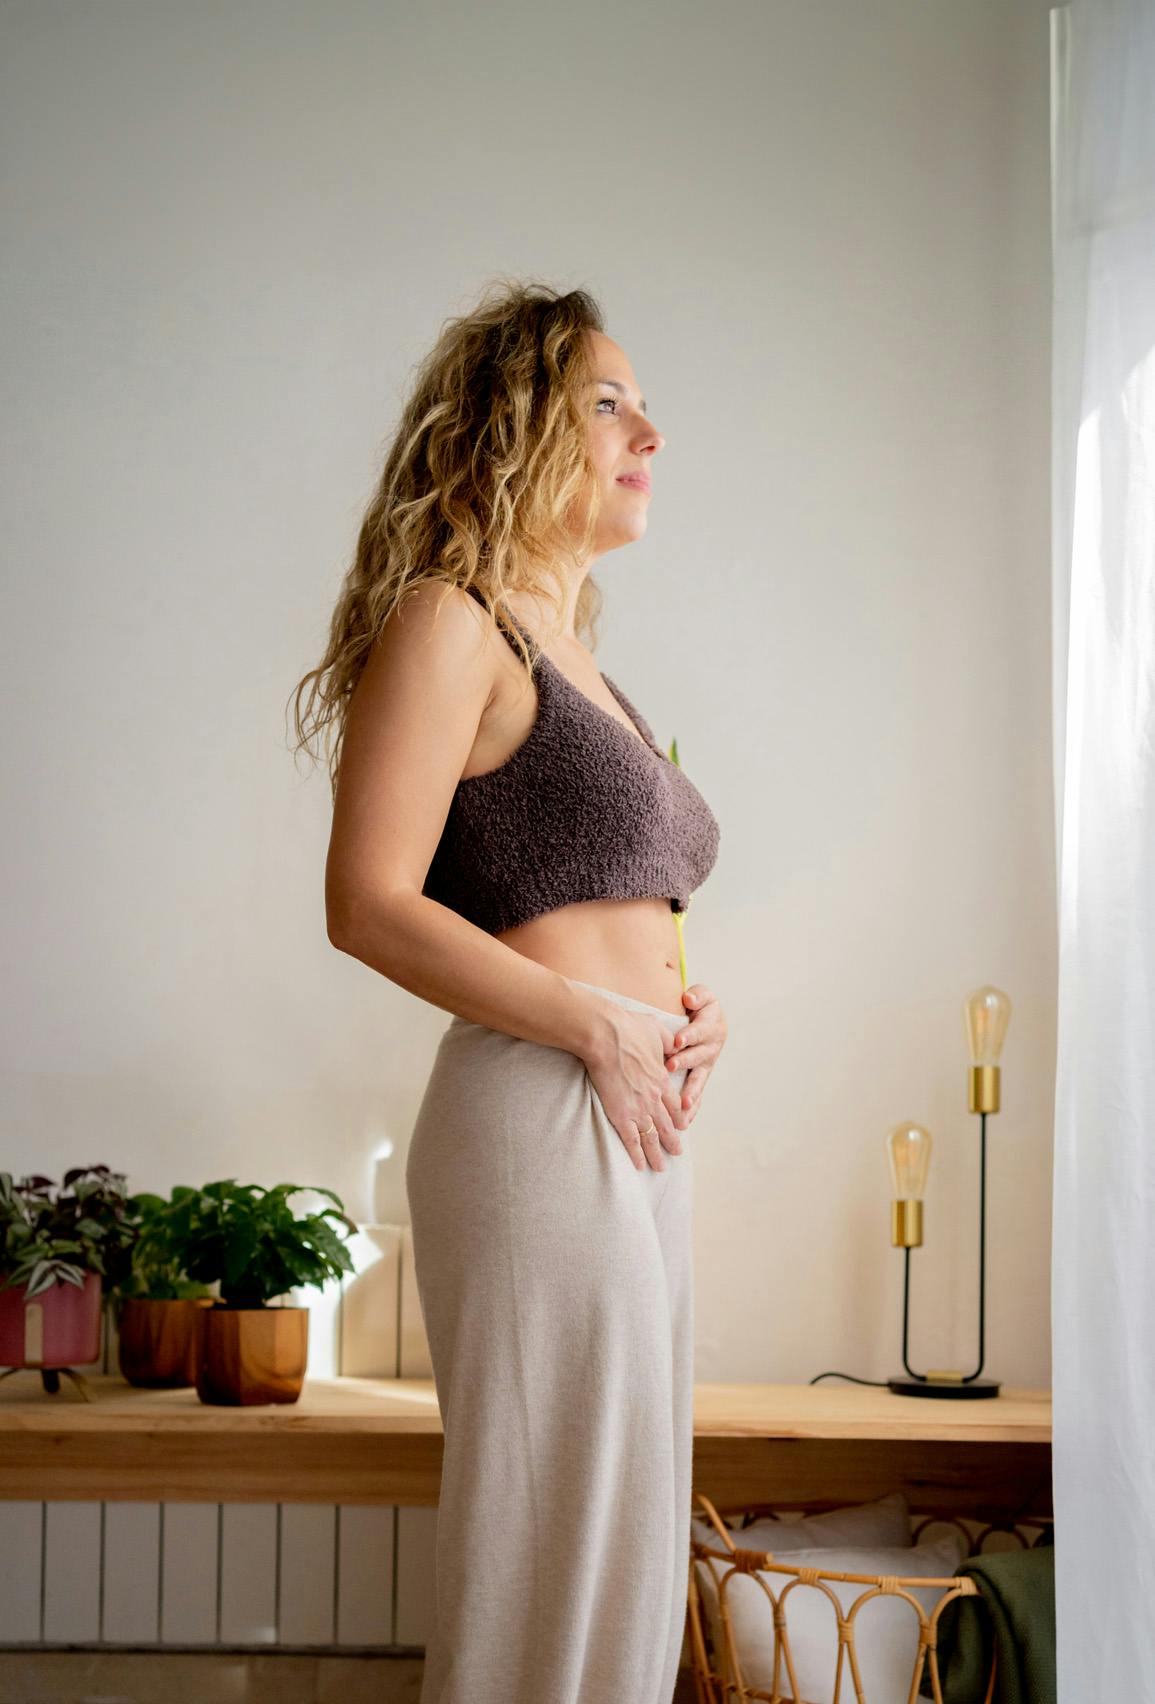 Woman looking out window while holding two hands on her stomach